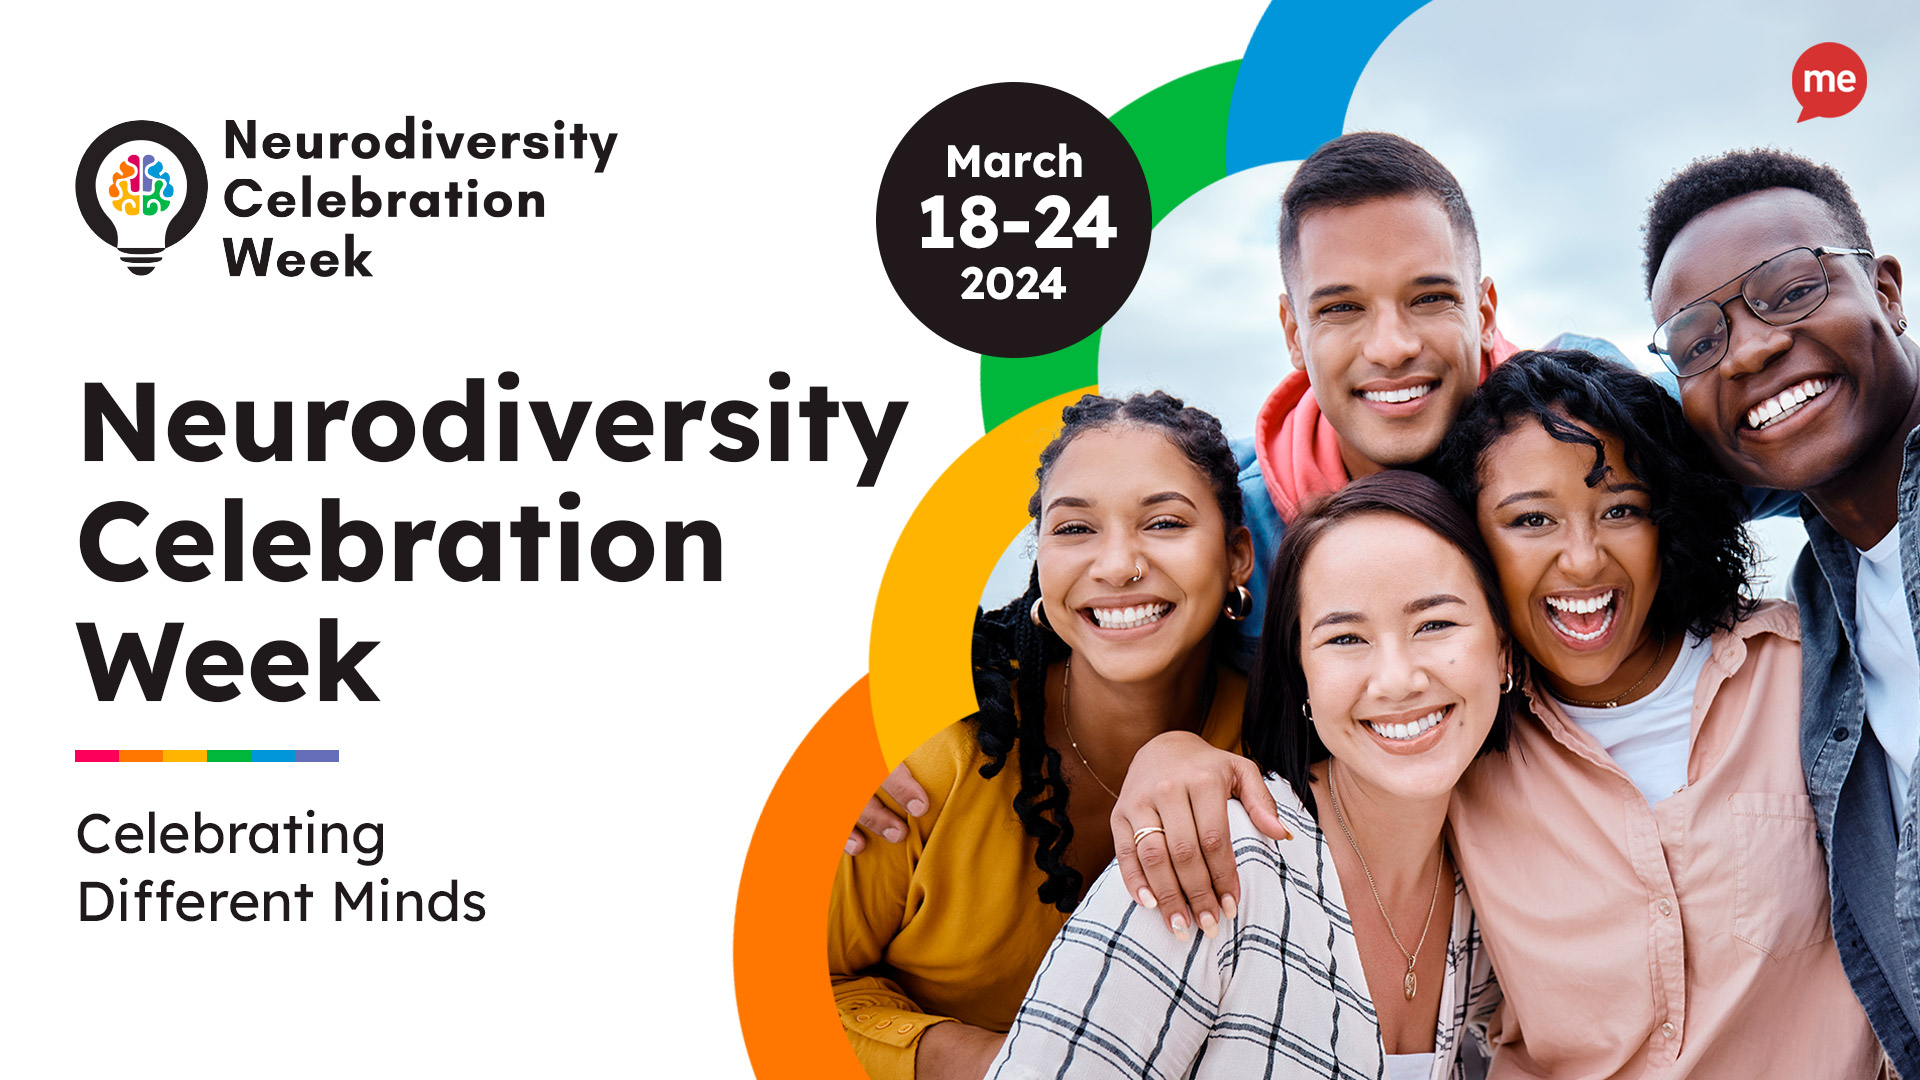 Neurodiversity Celebration Week. Celebrating Different Minds March 18-24 with an image of 4 young people of different races and genders smiling and the Neurodiversity Week logo in the top left hand side.